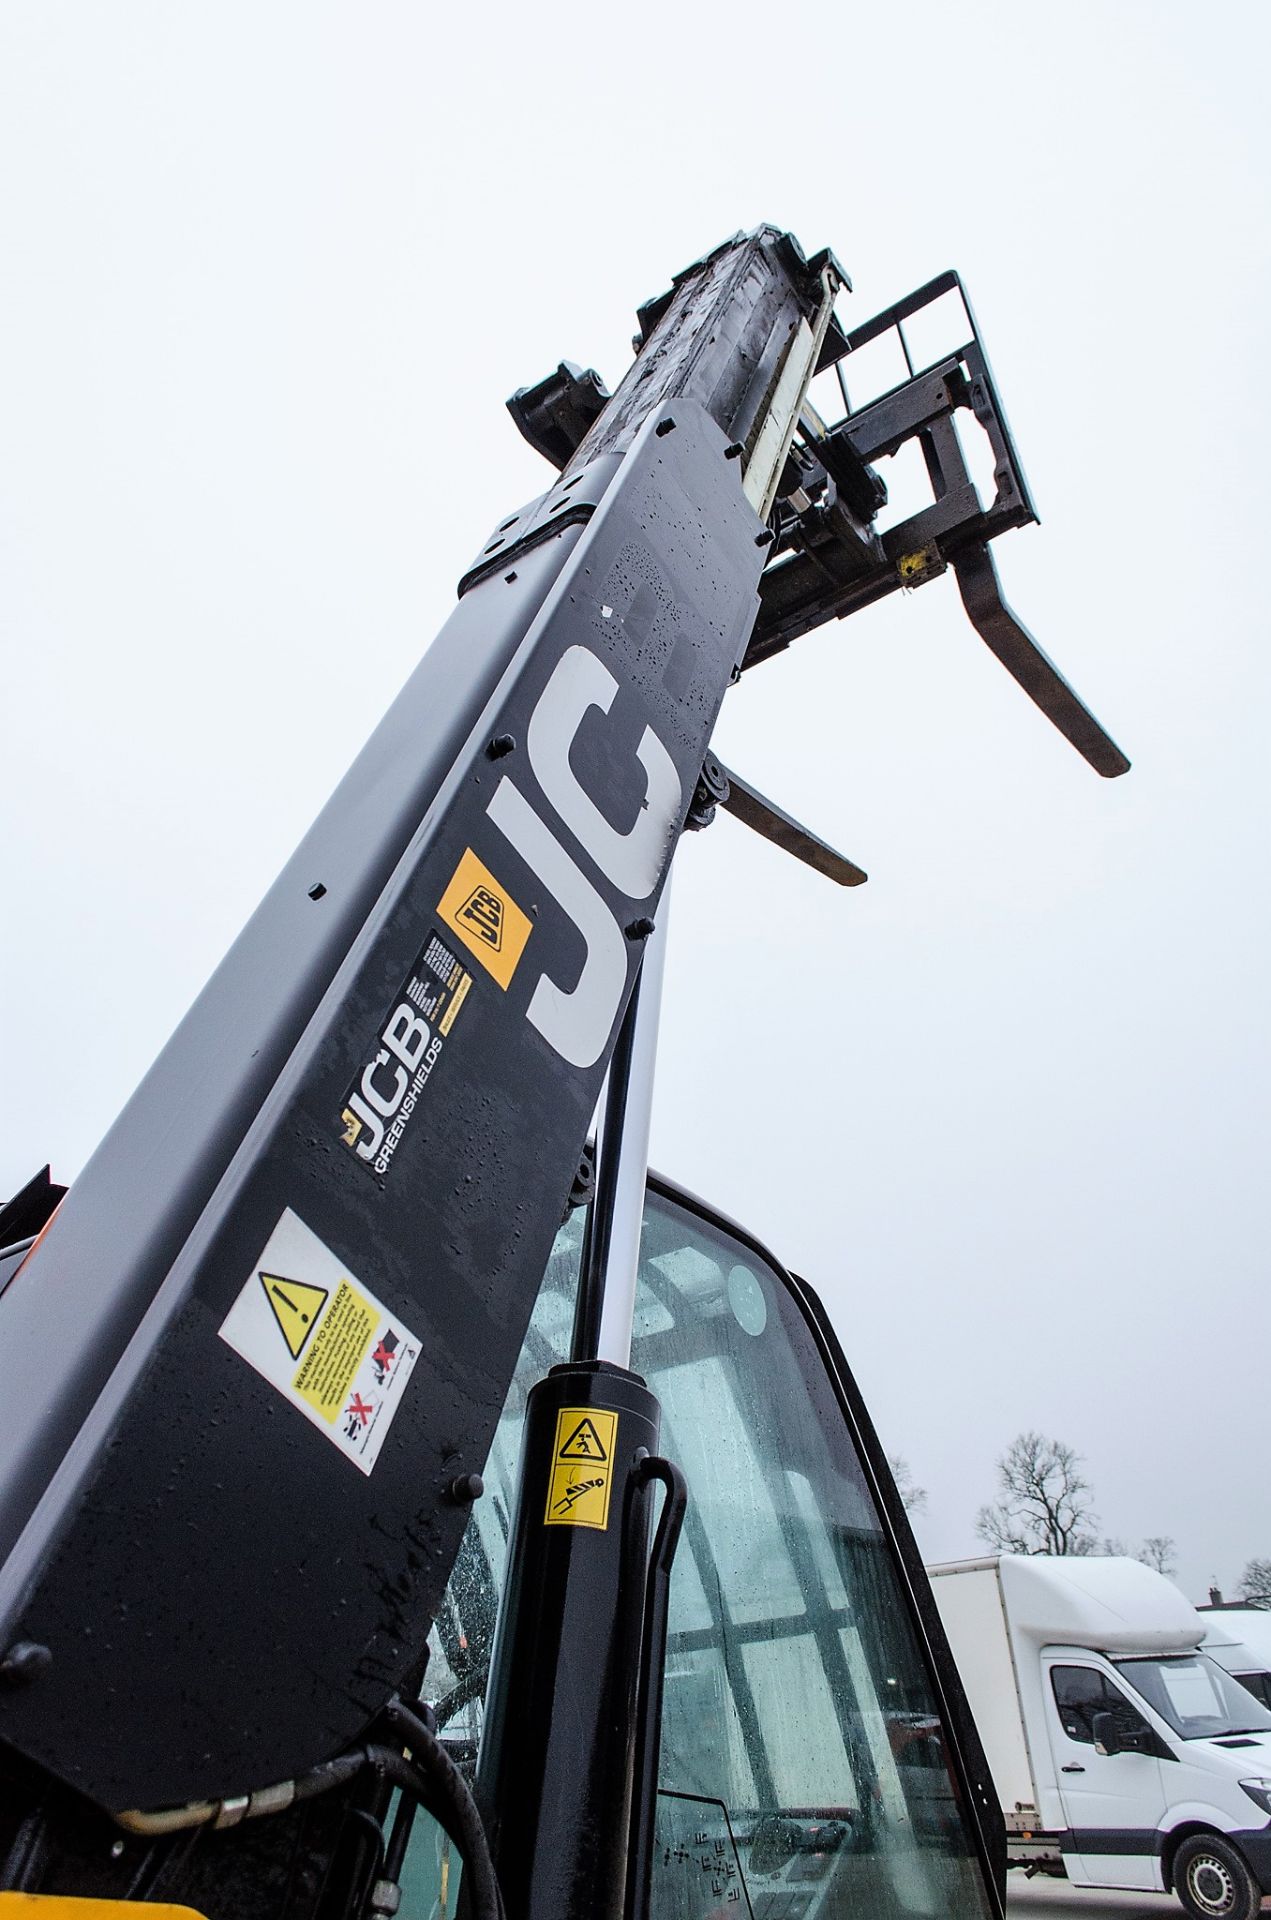 JCB Teletruk 30D 4x4 telescopic fork lift truck Year: 2013 S/N: 1541935 Recorded Hours: 1127 A623434 - Image 14 of 24